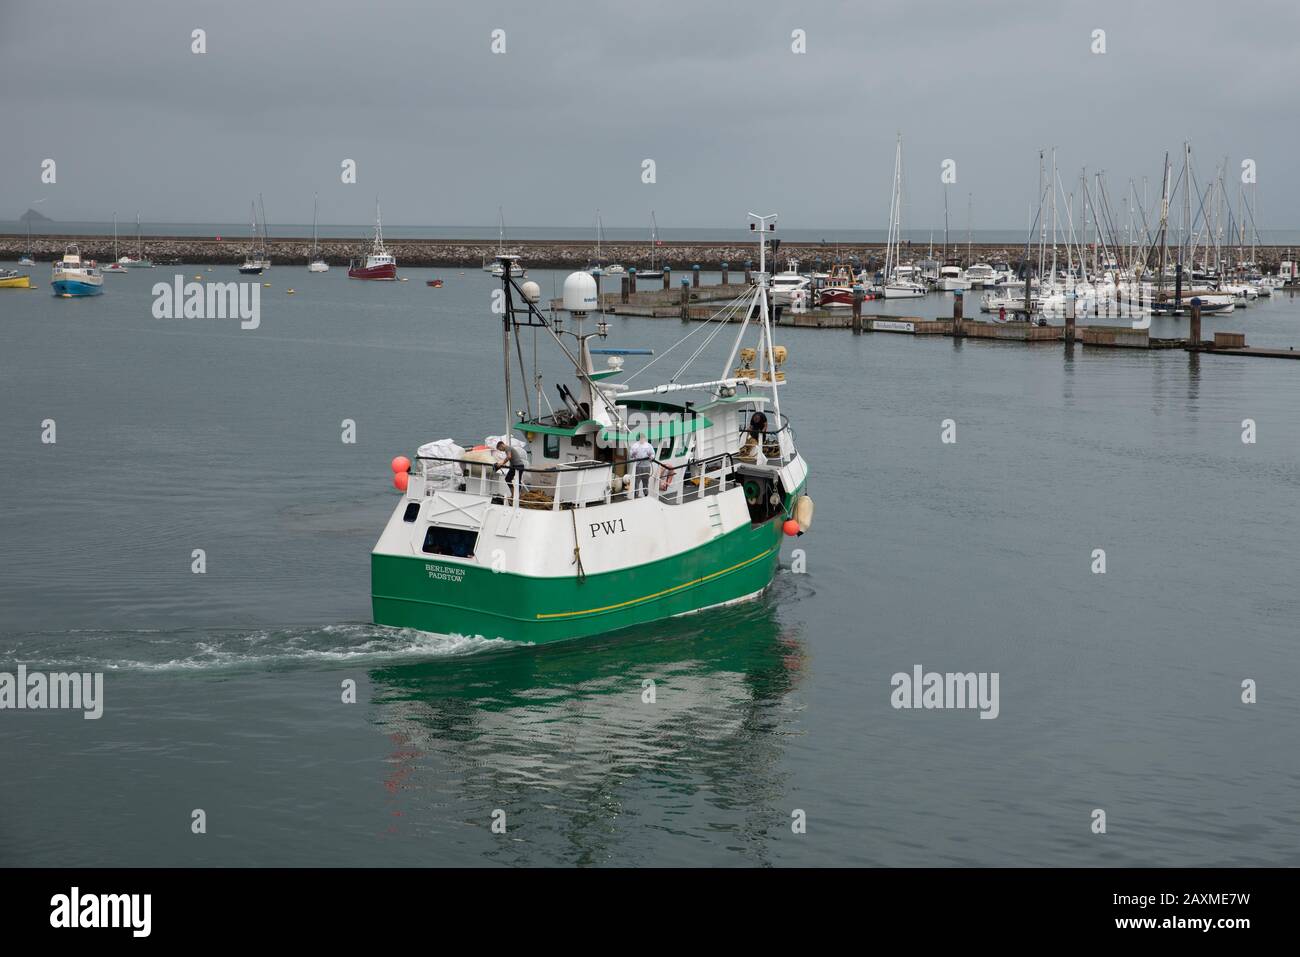 A fishing boat leaving Brixham harbour, one of Great Britain's largest fishing port. Stock Photo